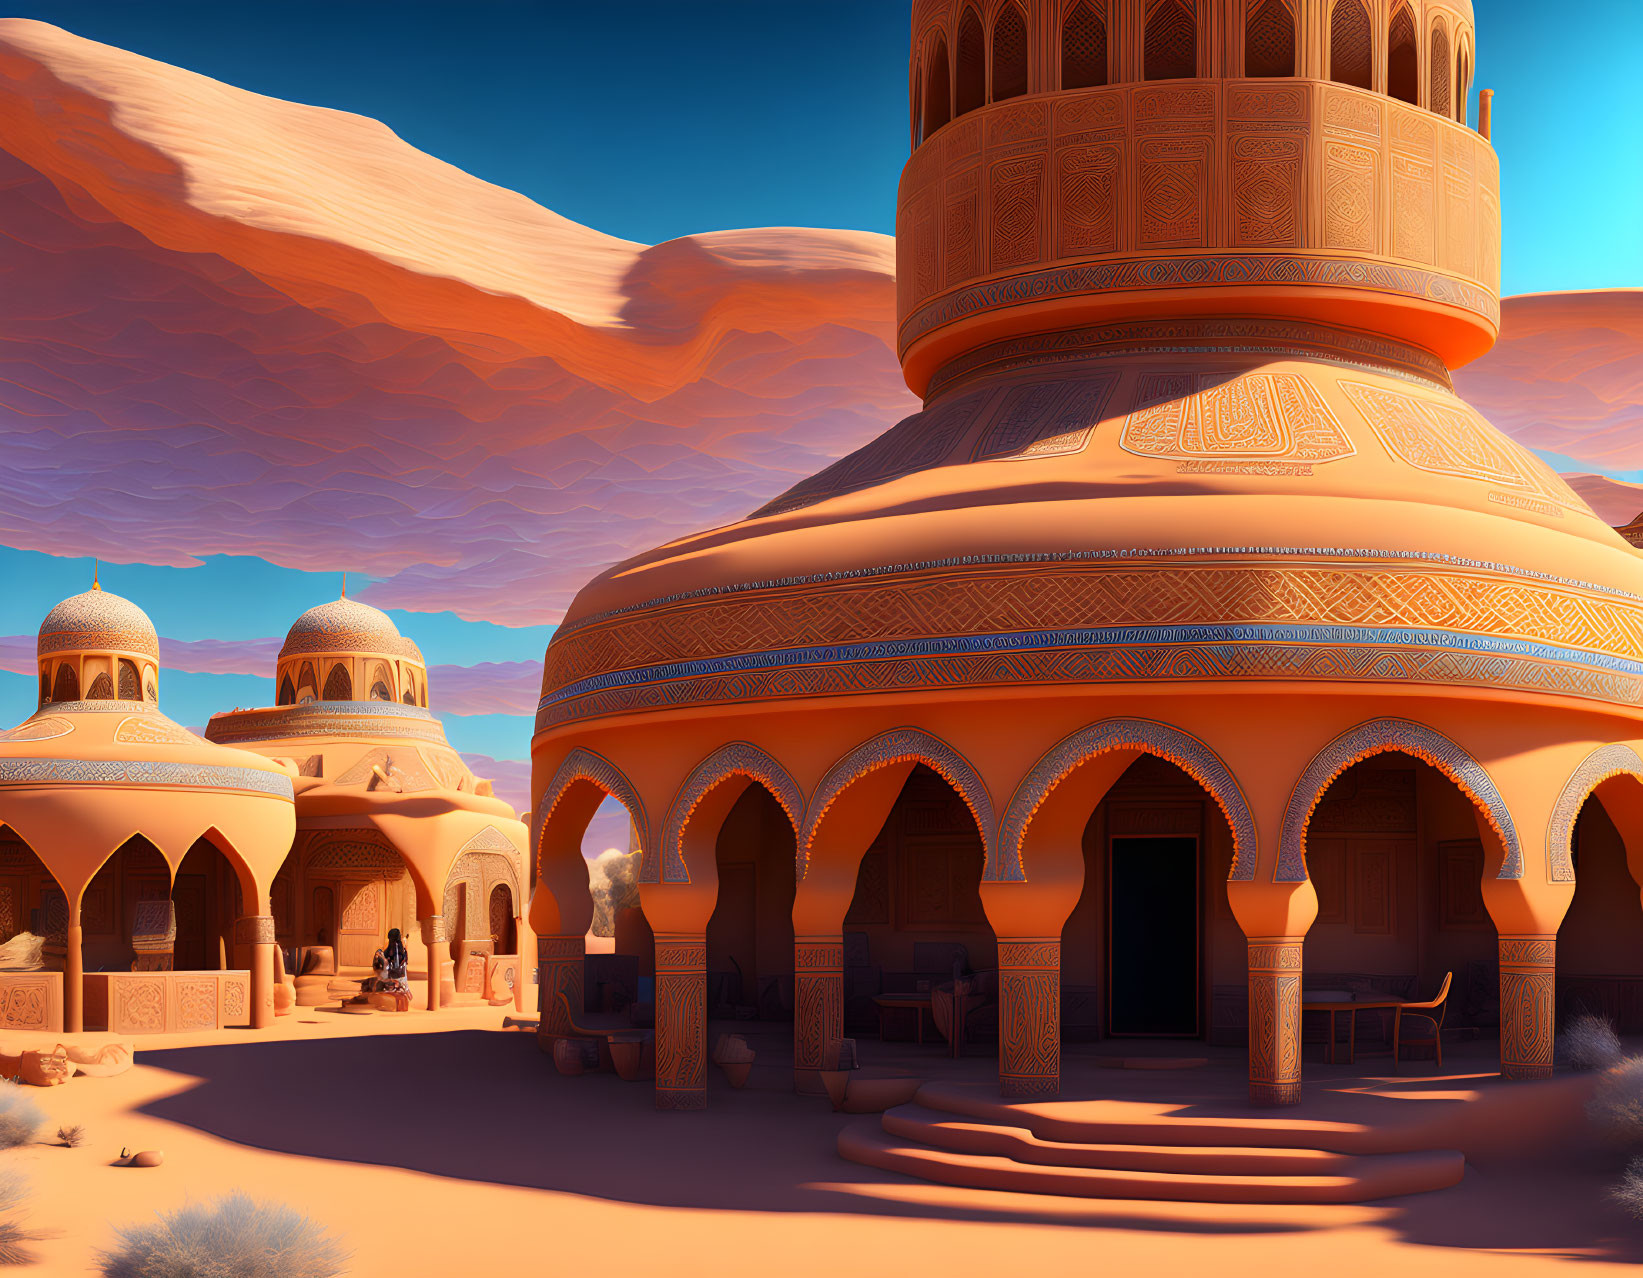 Ornate Golden Desert Palace with Domes and Arches in Middle Eastern Setting